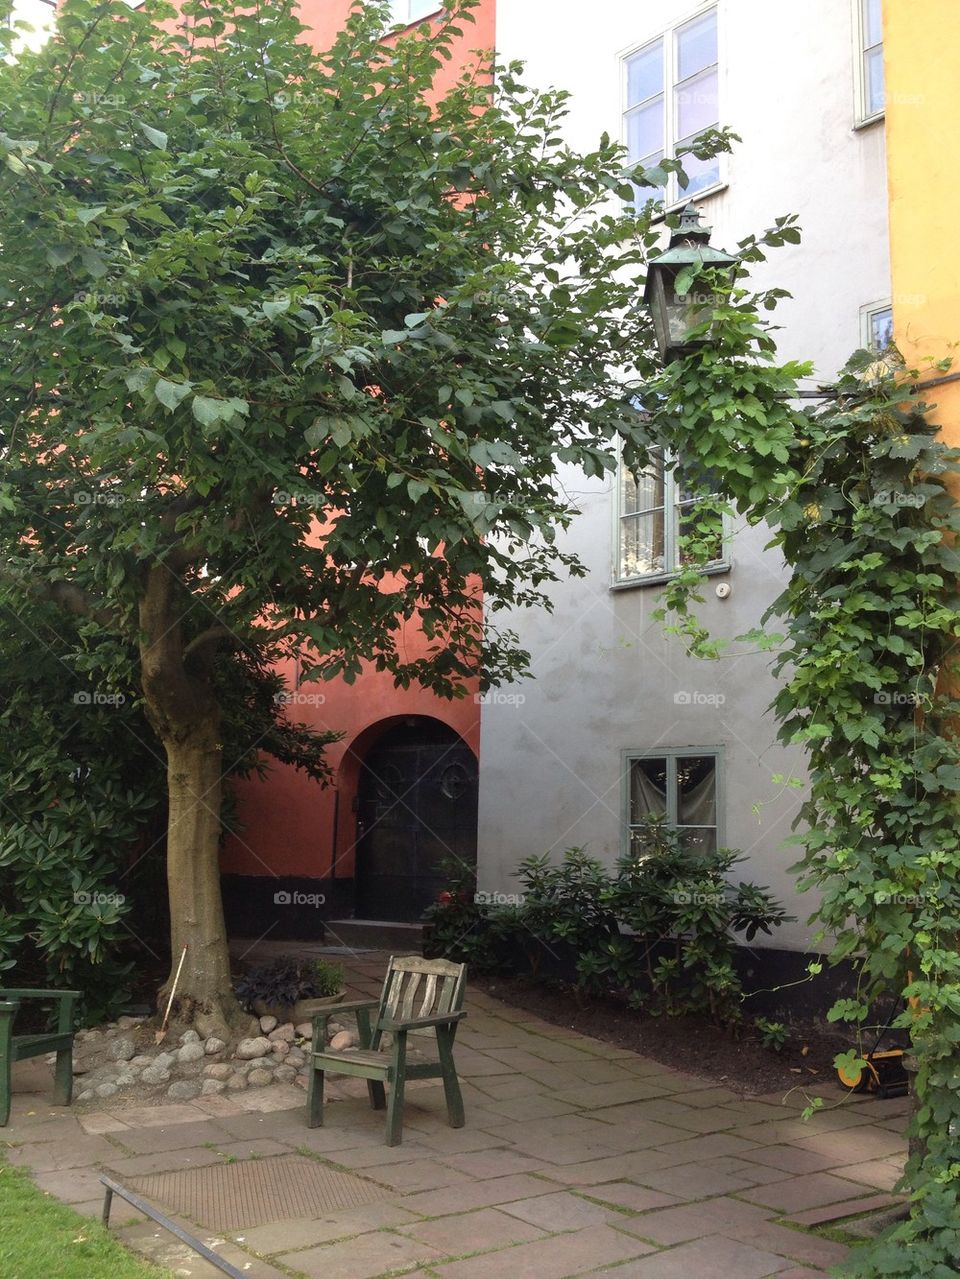 Courtyard in Gamla Stan, the old town in Stockholm.